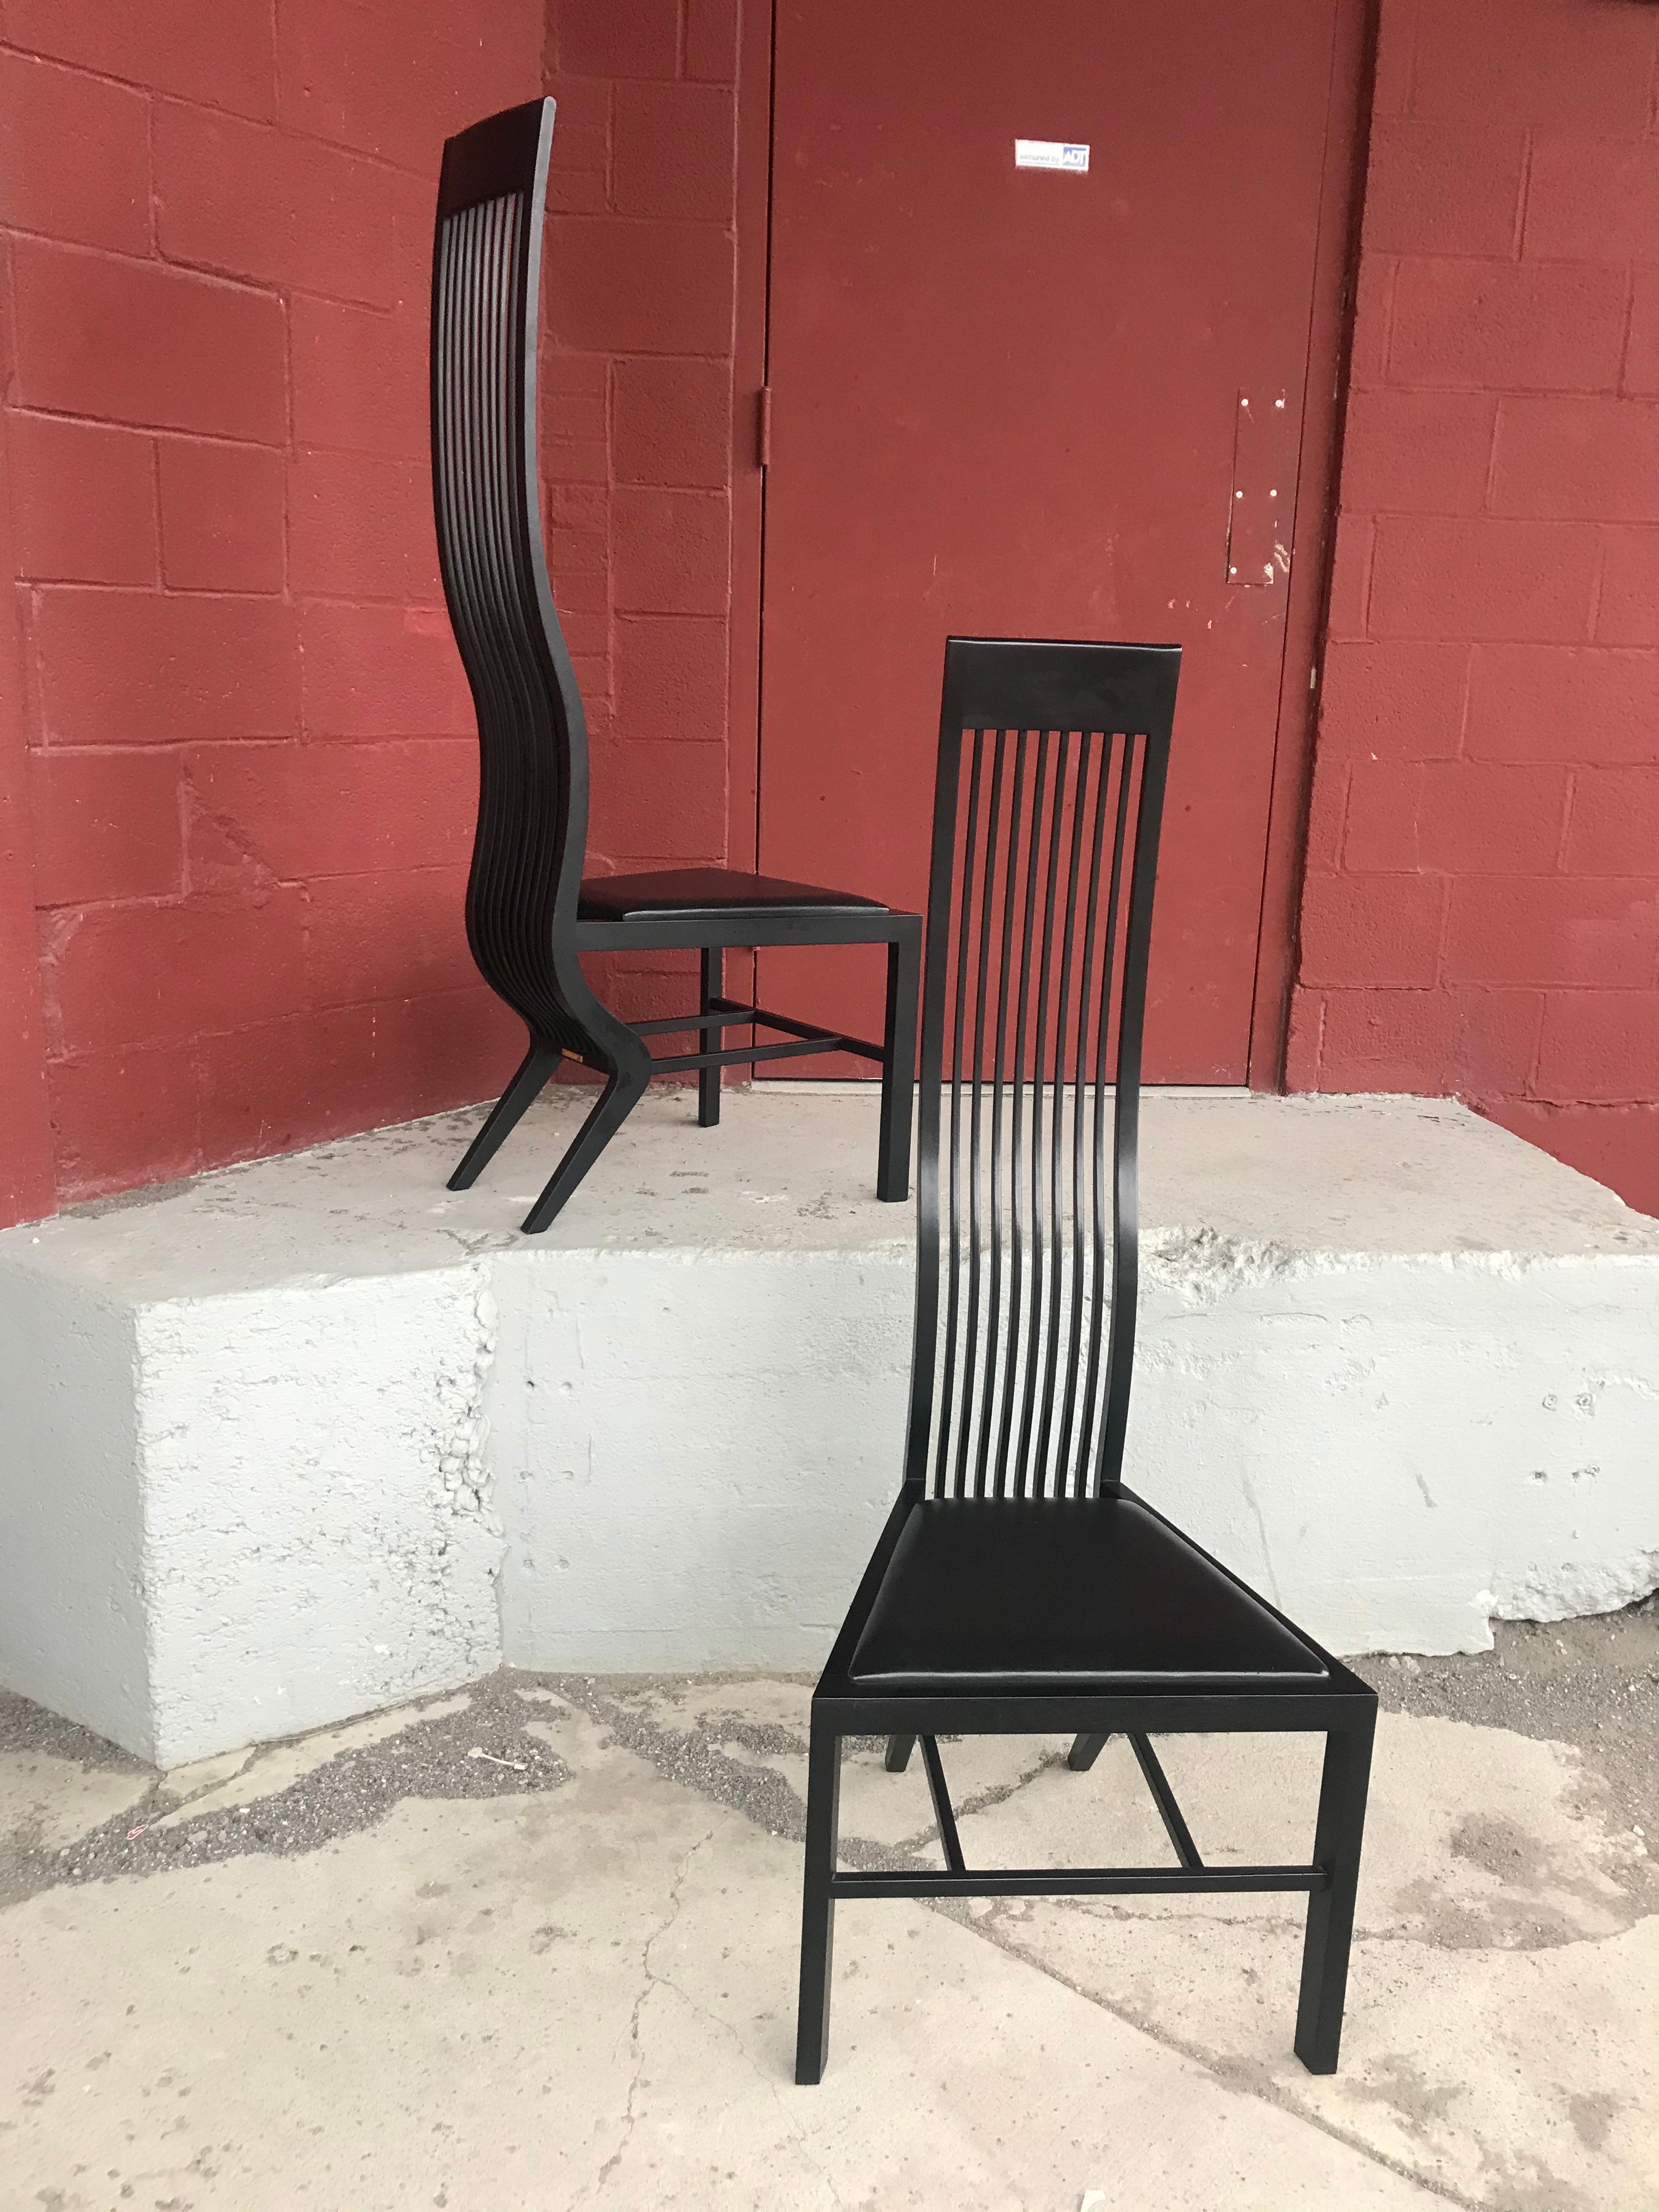 Stunning set 8 modernist black lacquer and leather dining chairs, by Arata Isozaki, Tendo Mekko co. Ltd, contemporary modern, purchased in the early 1980s, all chairs retain original label as well as brass plaque with series number, Very early. Low